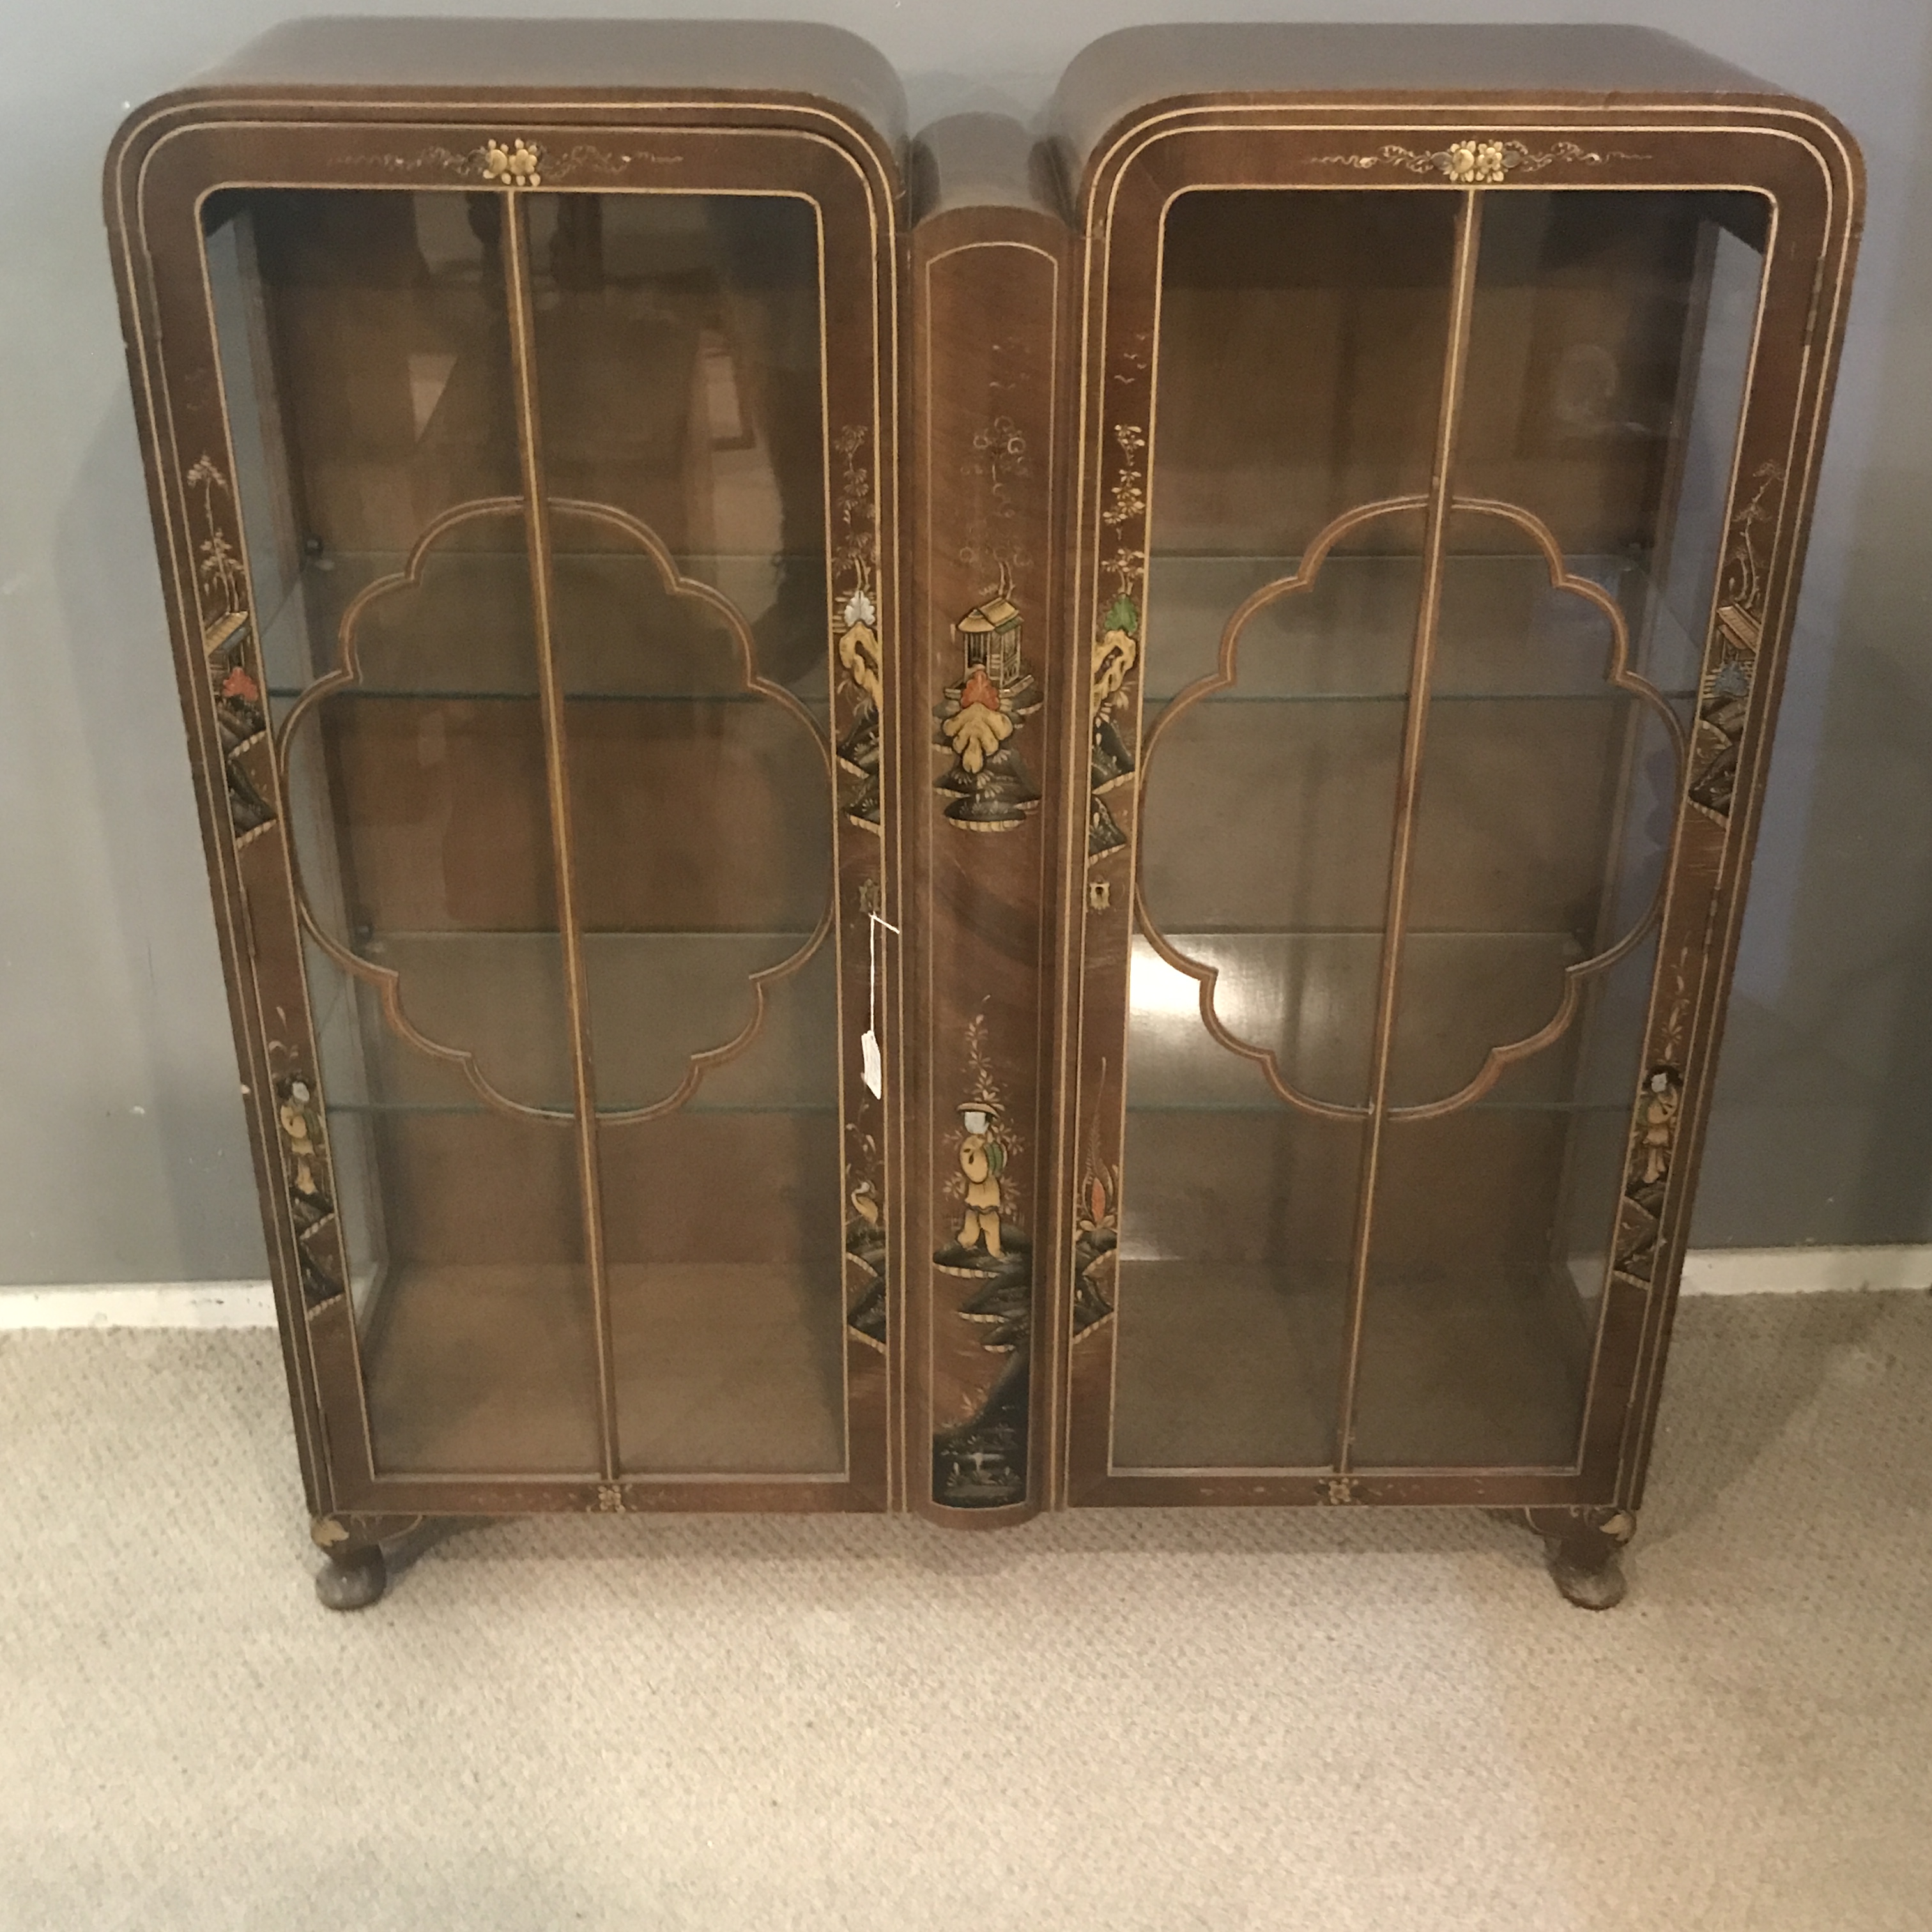 ANTIQUE CHINOISERIE DISPLAY CABINET